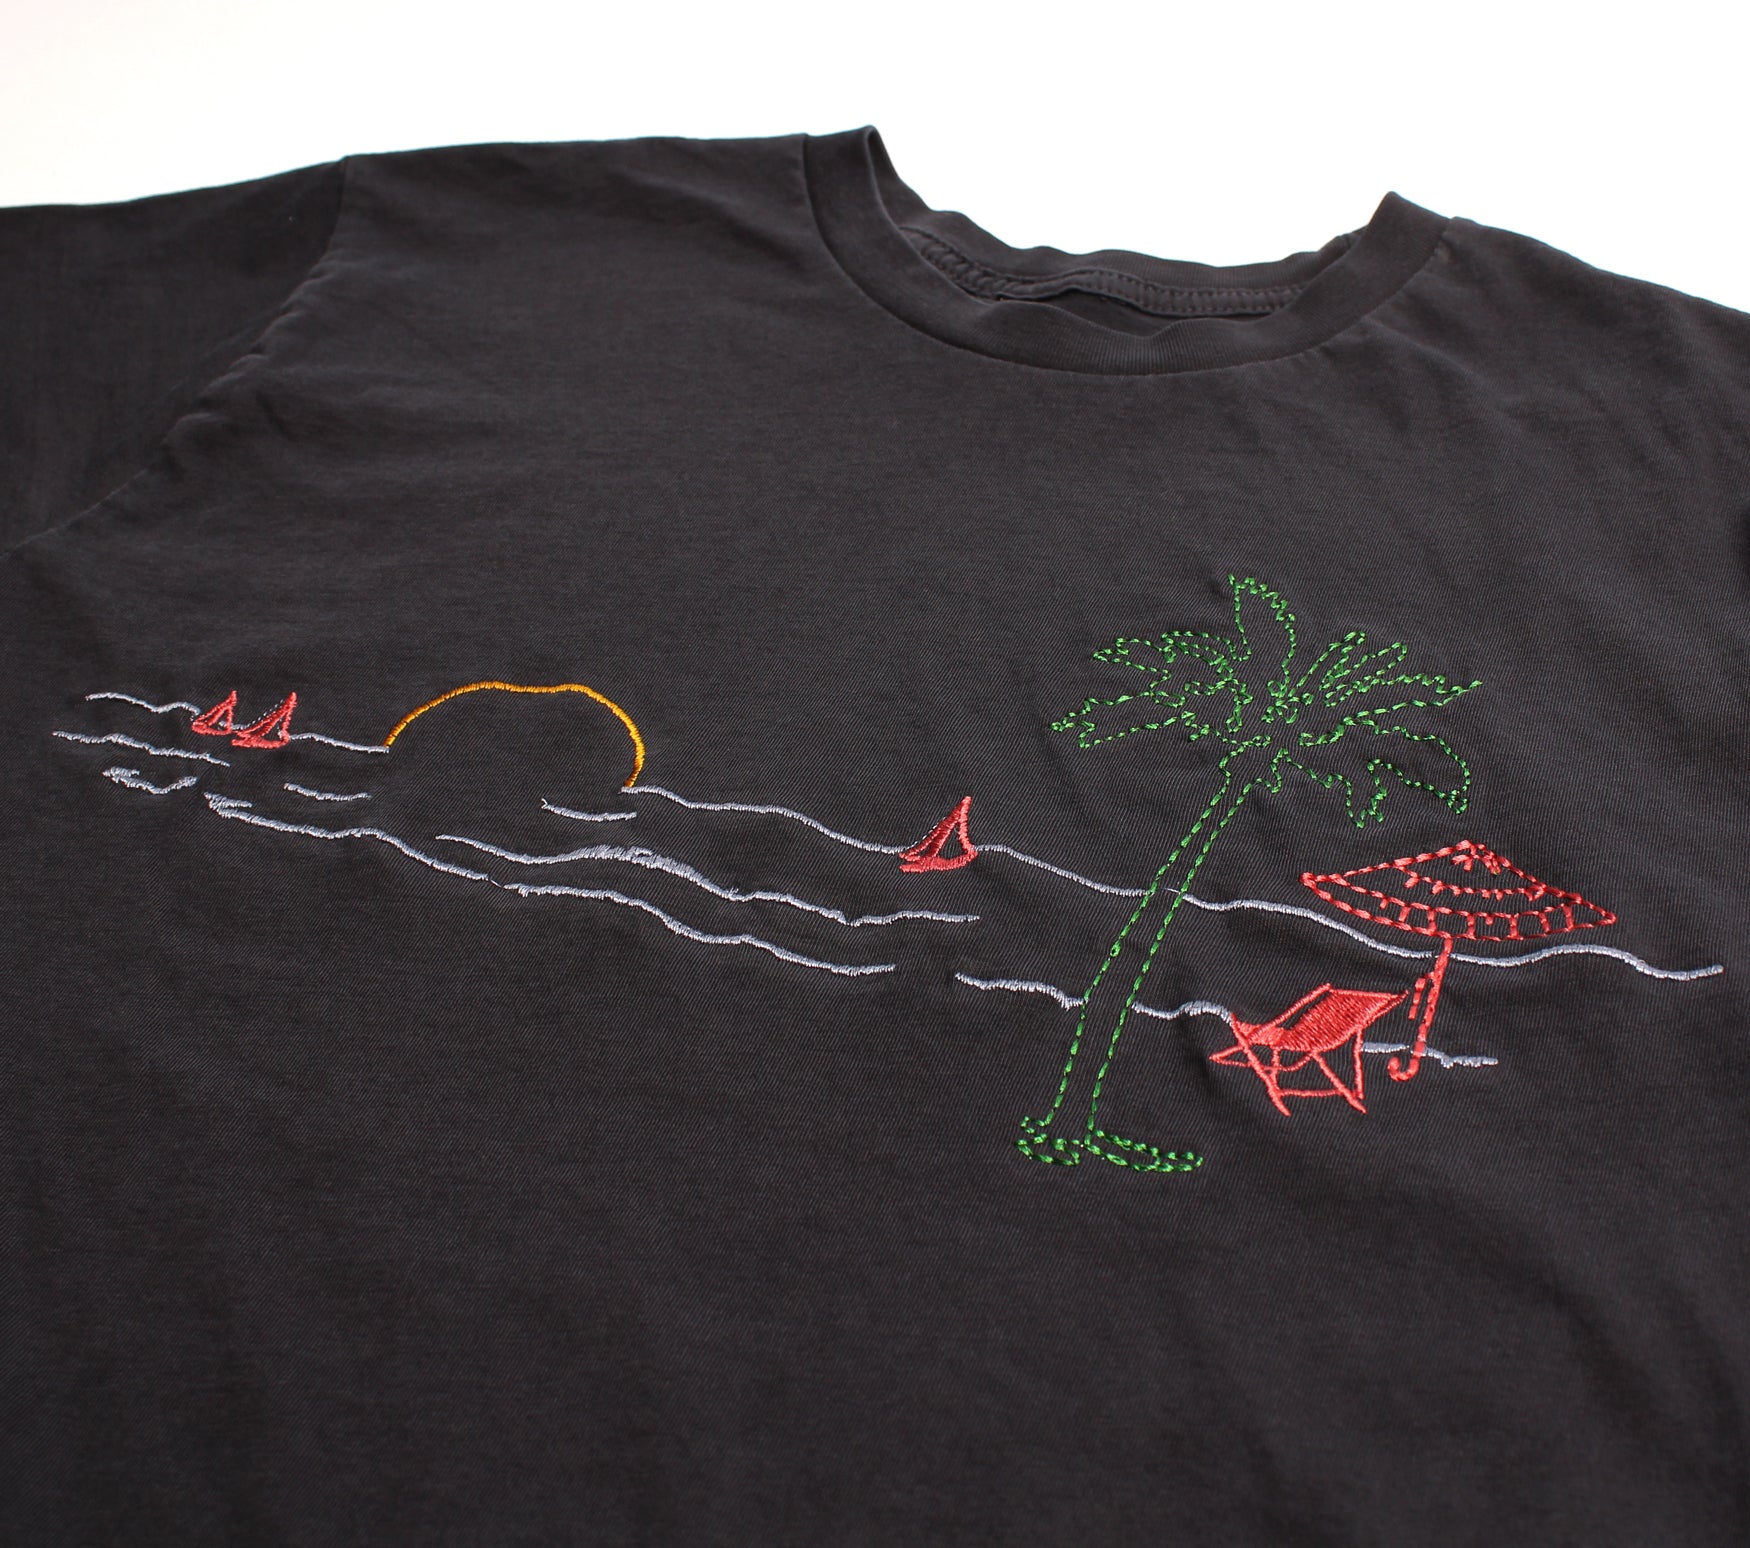 Beach Vacation Paradise Embroidered graphic tee by Altru Apparel